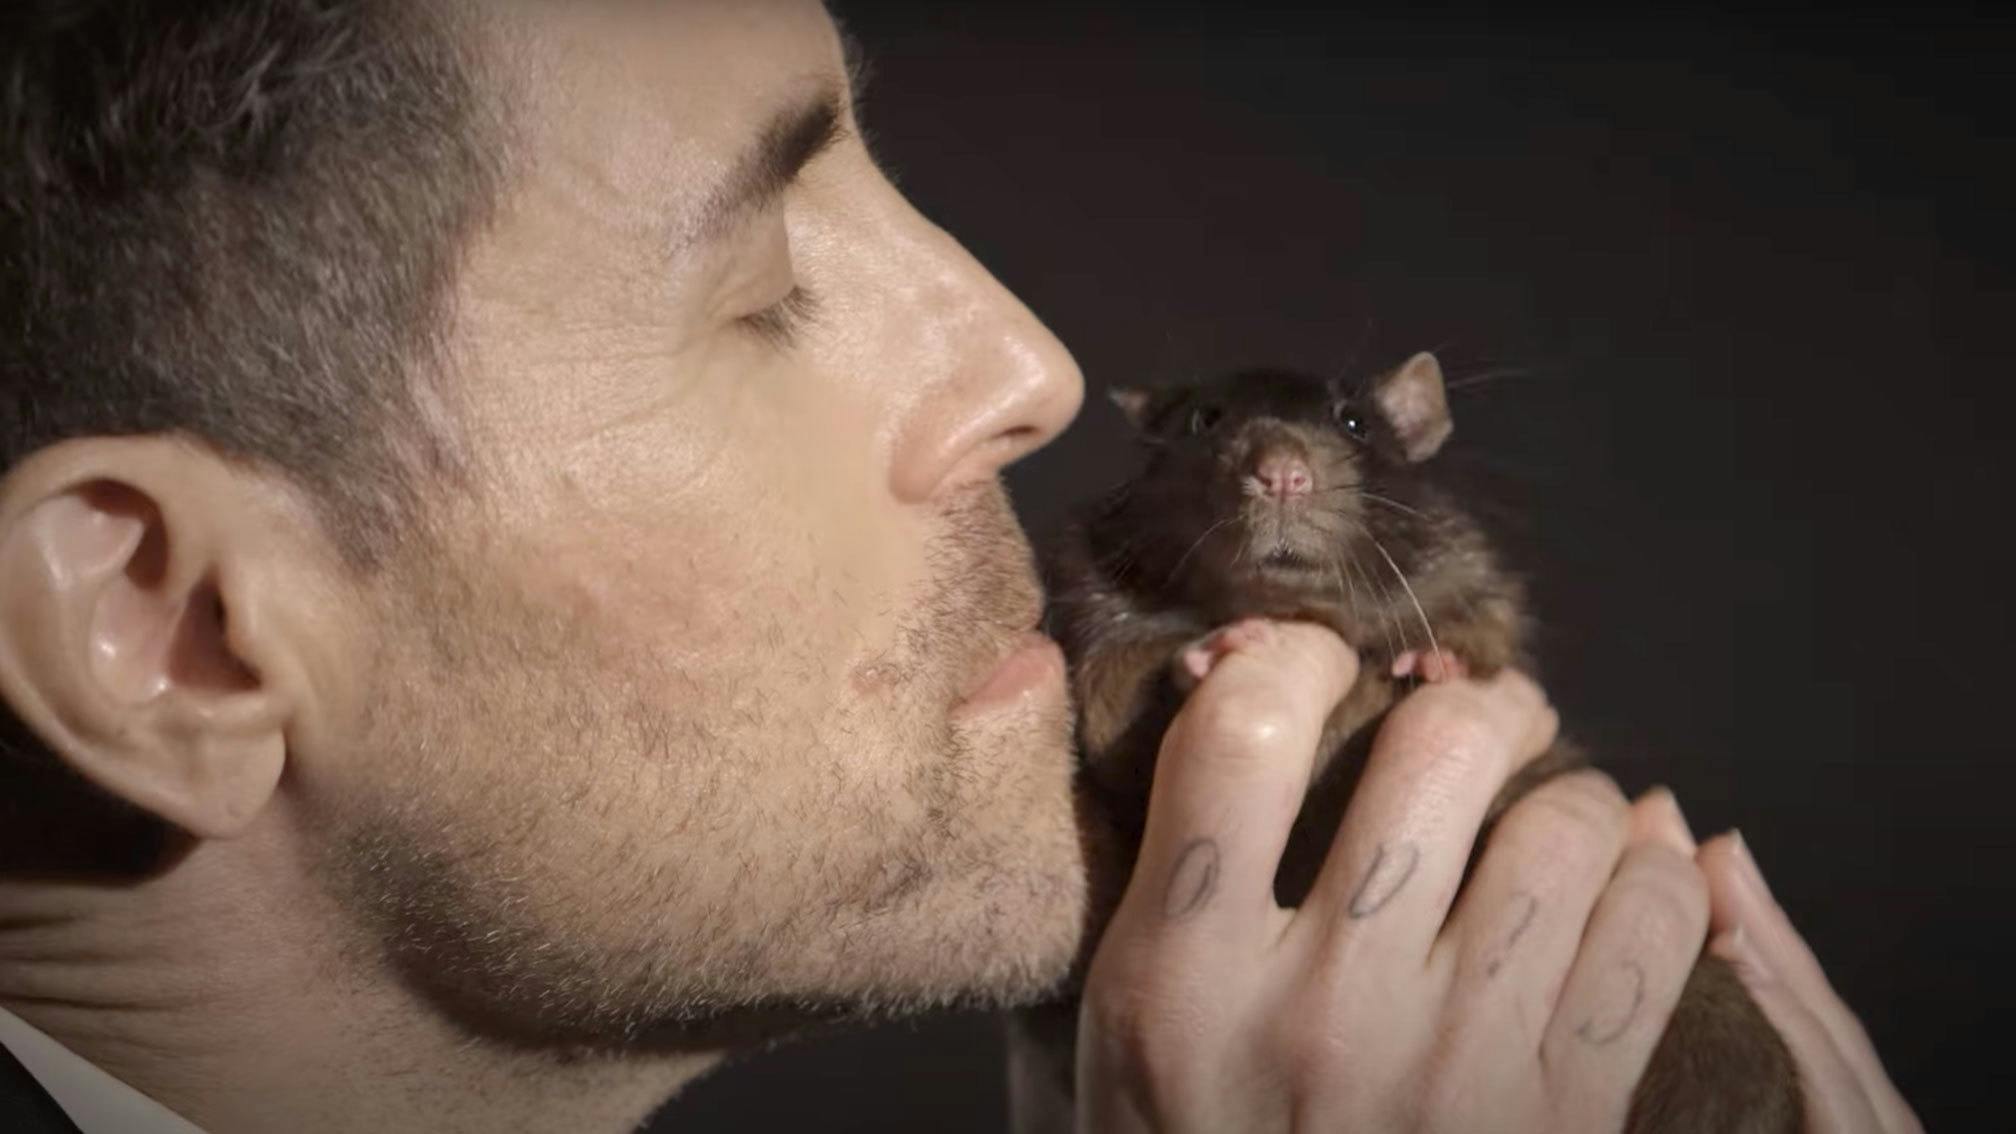 Watch: AFI’s Davey Havok speaks out against animal testing and speciesism in new PETA ad